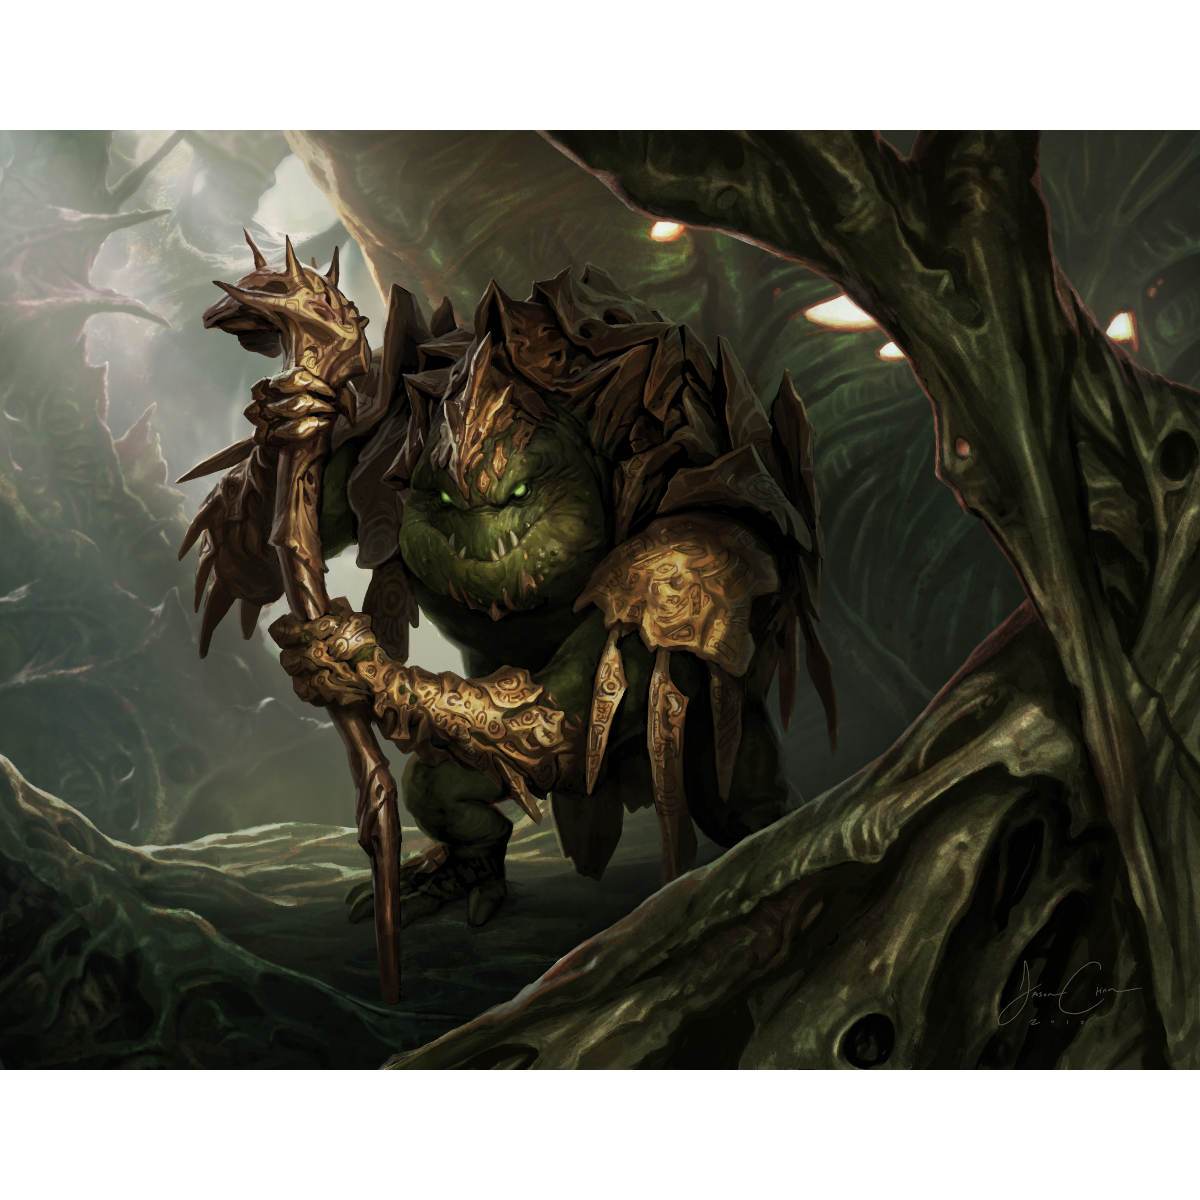 Thrun, the Last Troll Print - Print - Original Magic Art - Accessories for Magic the Gathering and other card games